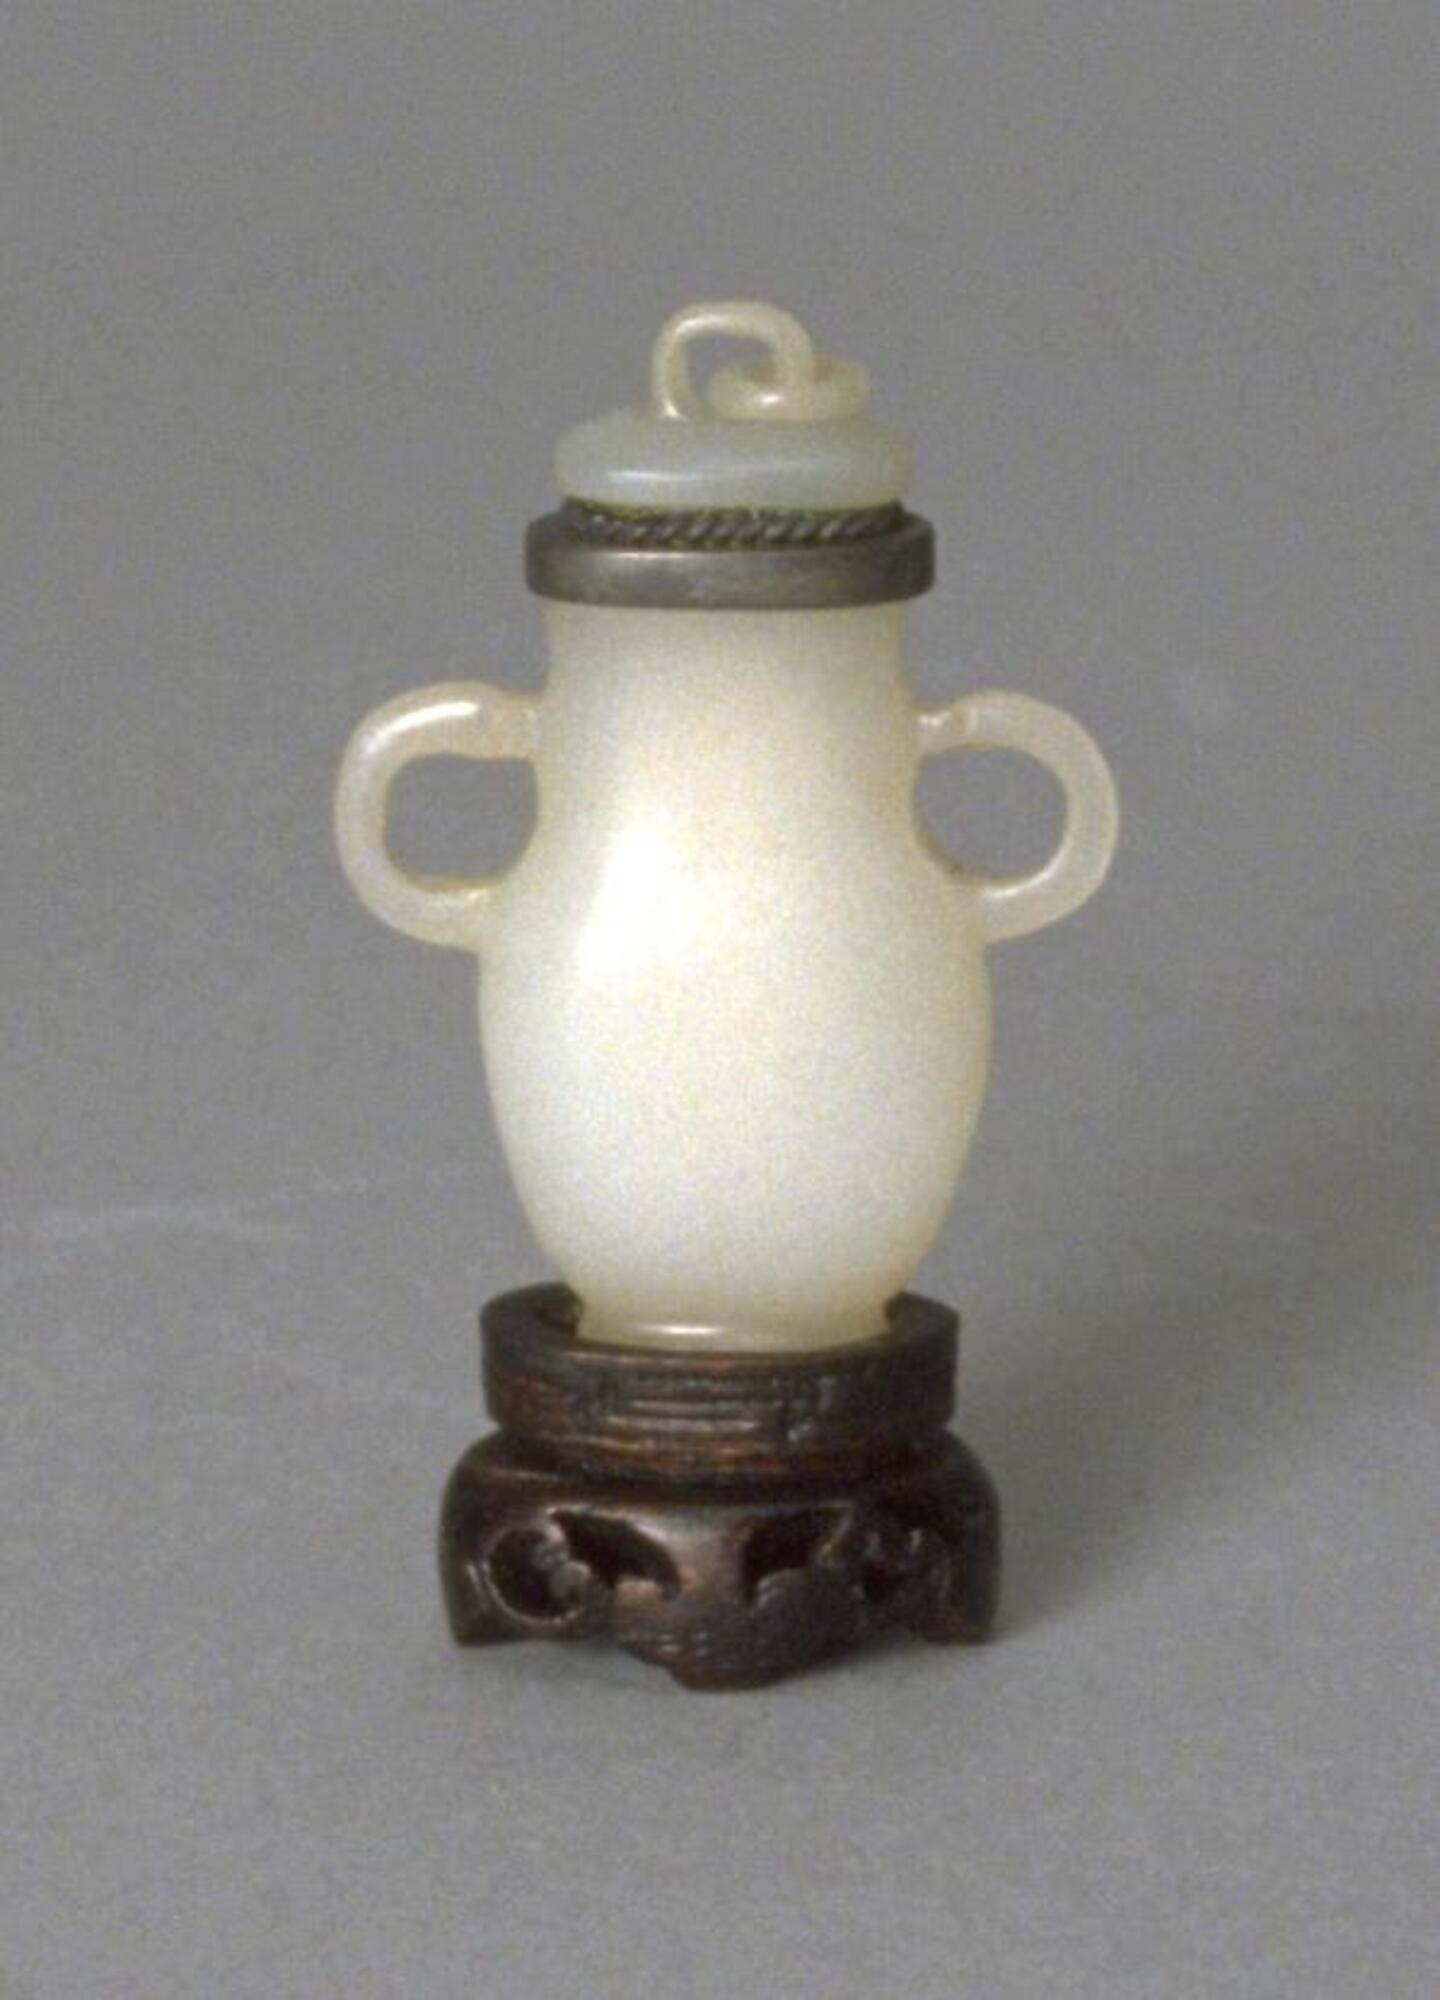 A white nephrite jade snuff bottle, shaped like a vase with two large circular handles on the side. The snuff bottle has a silver colored rim, with a stopper that also has a circular handle.&nbsp;